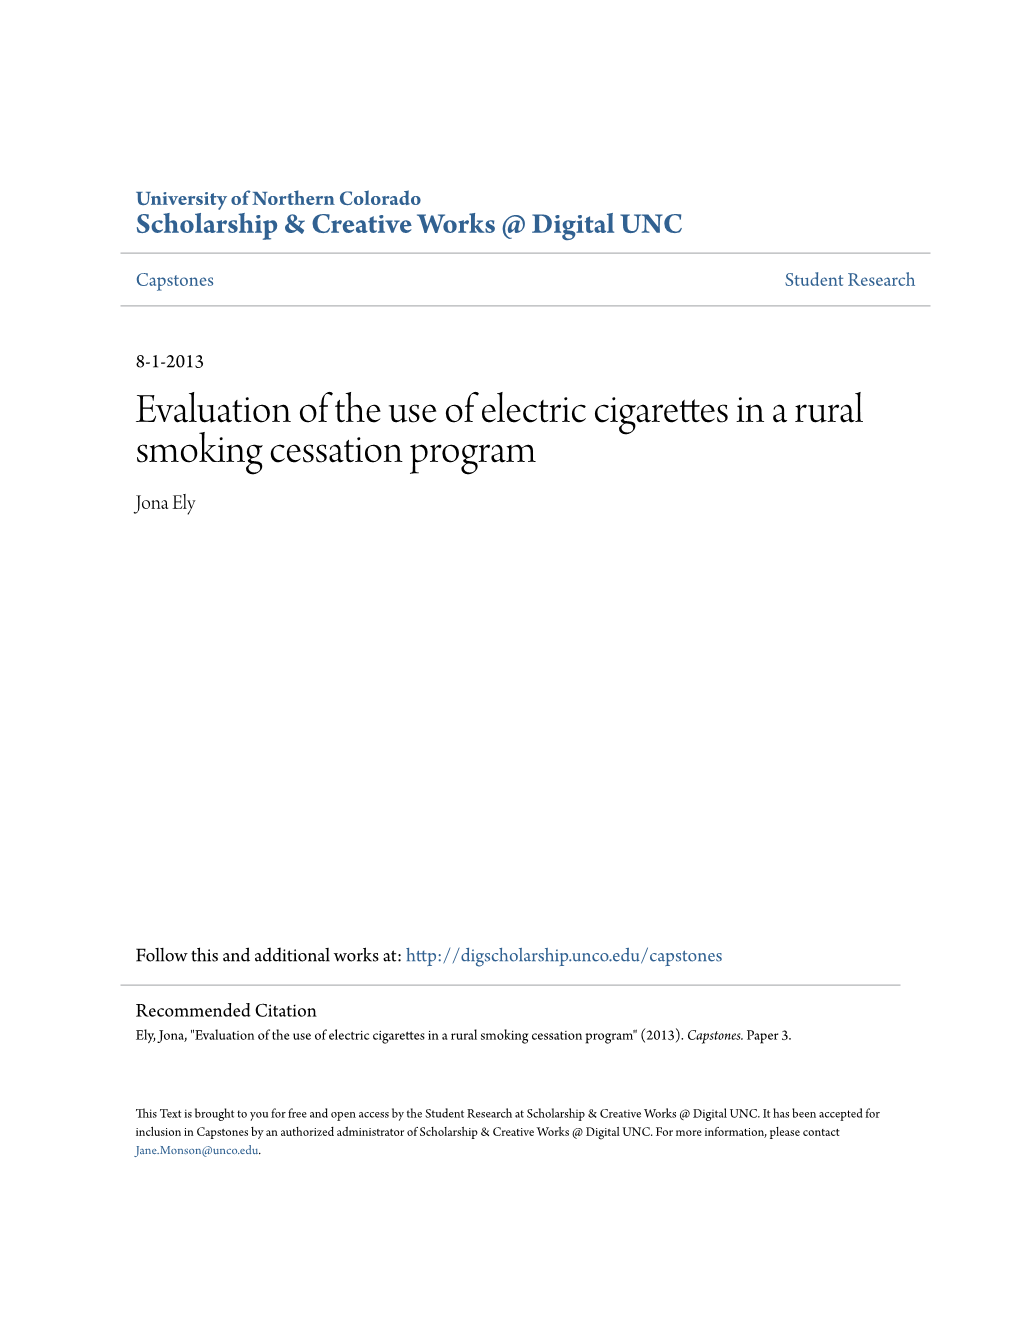 Evaluation of the Use of Electric Cigarettes in a Rural Smoking Cessation Program Jona Ely